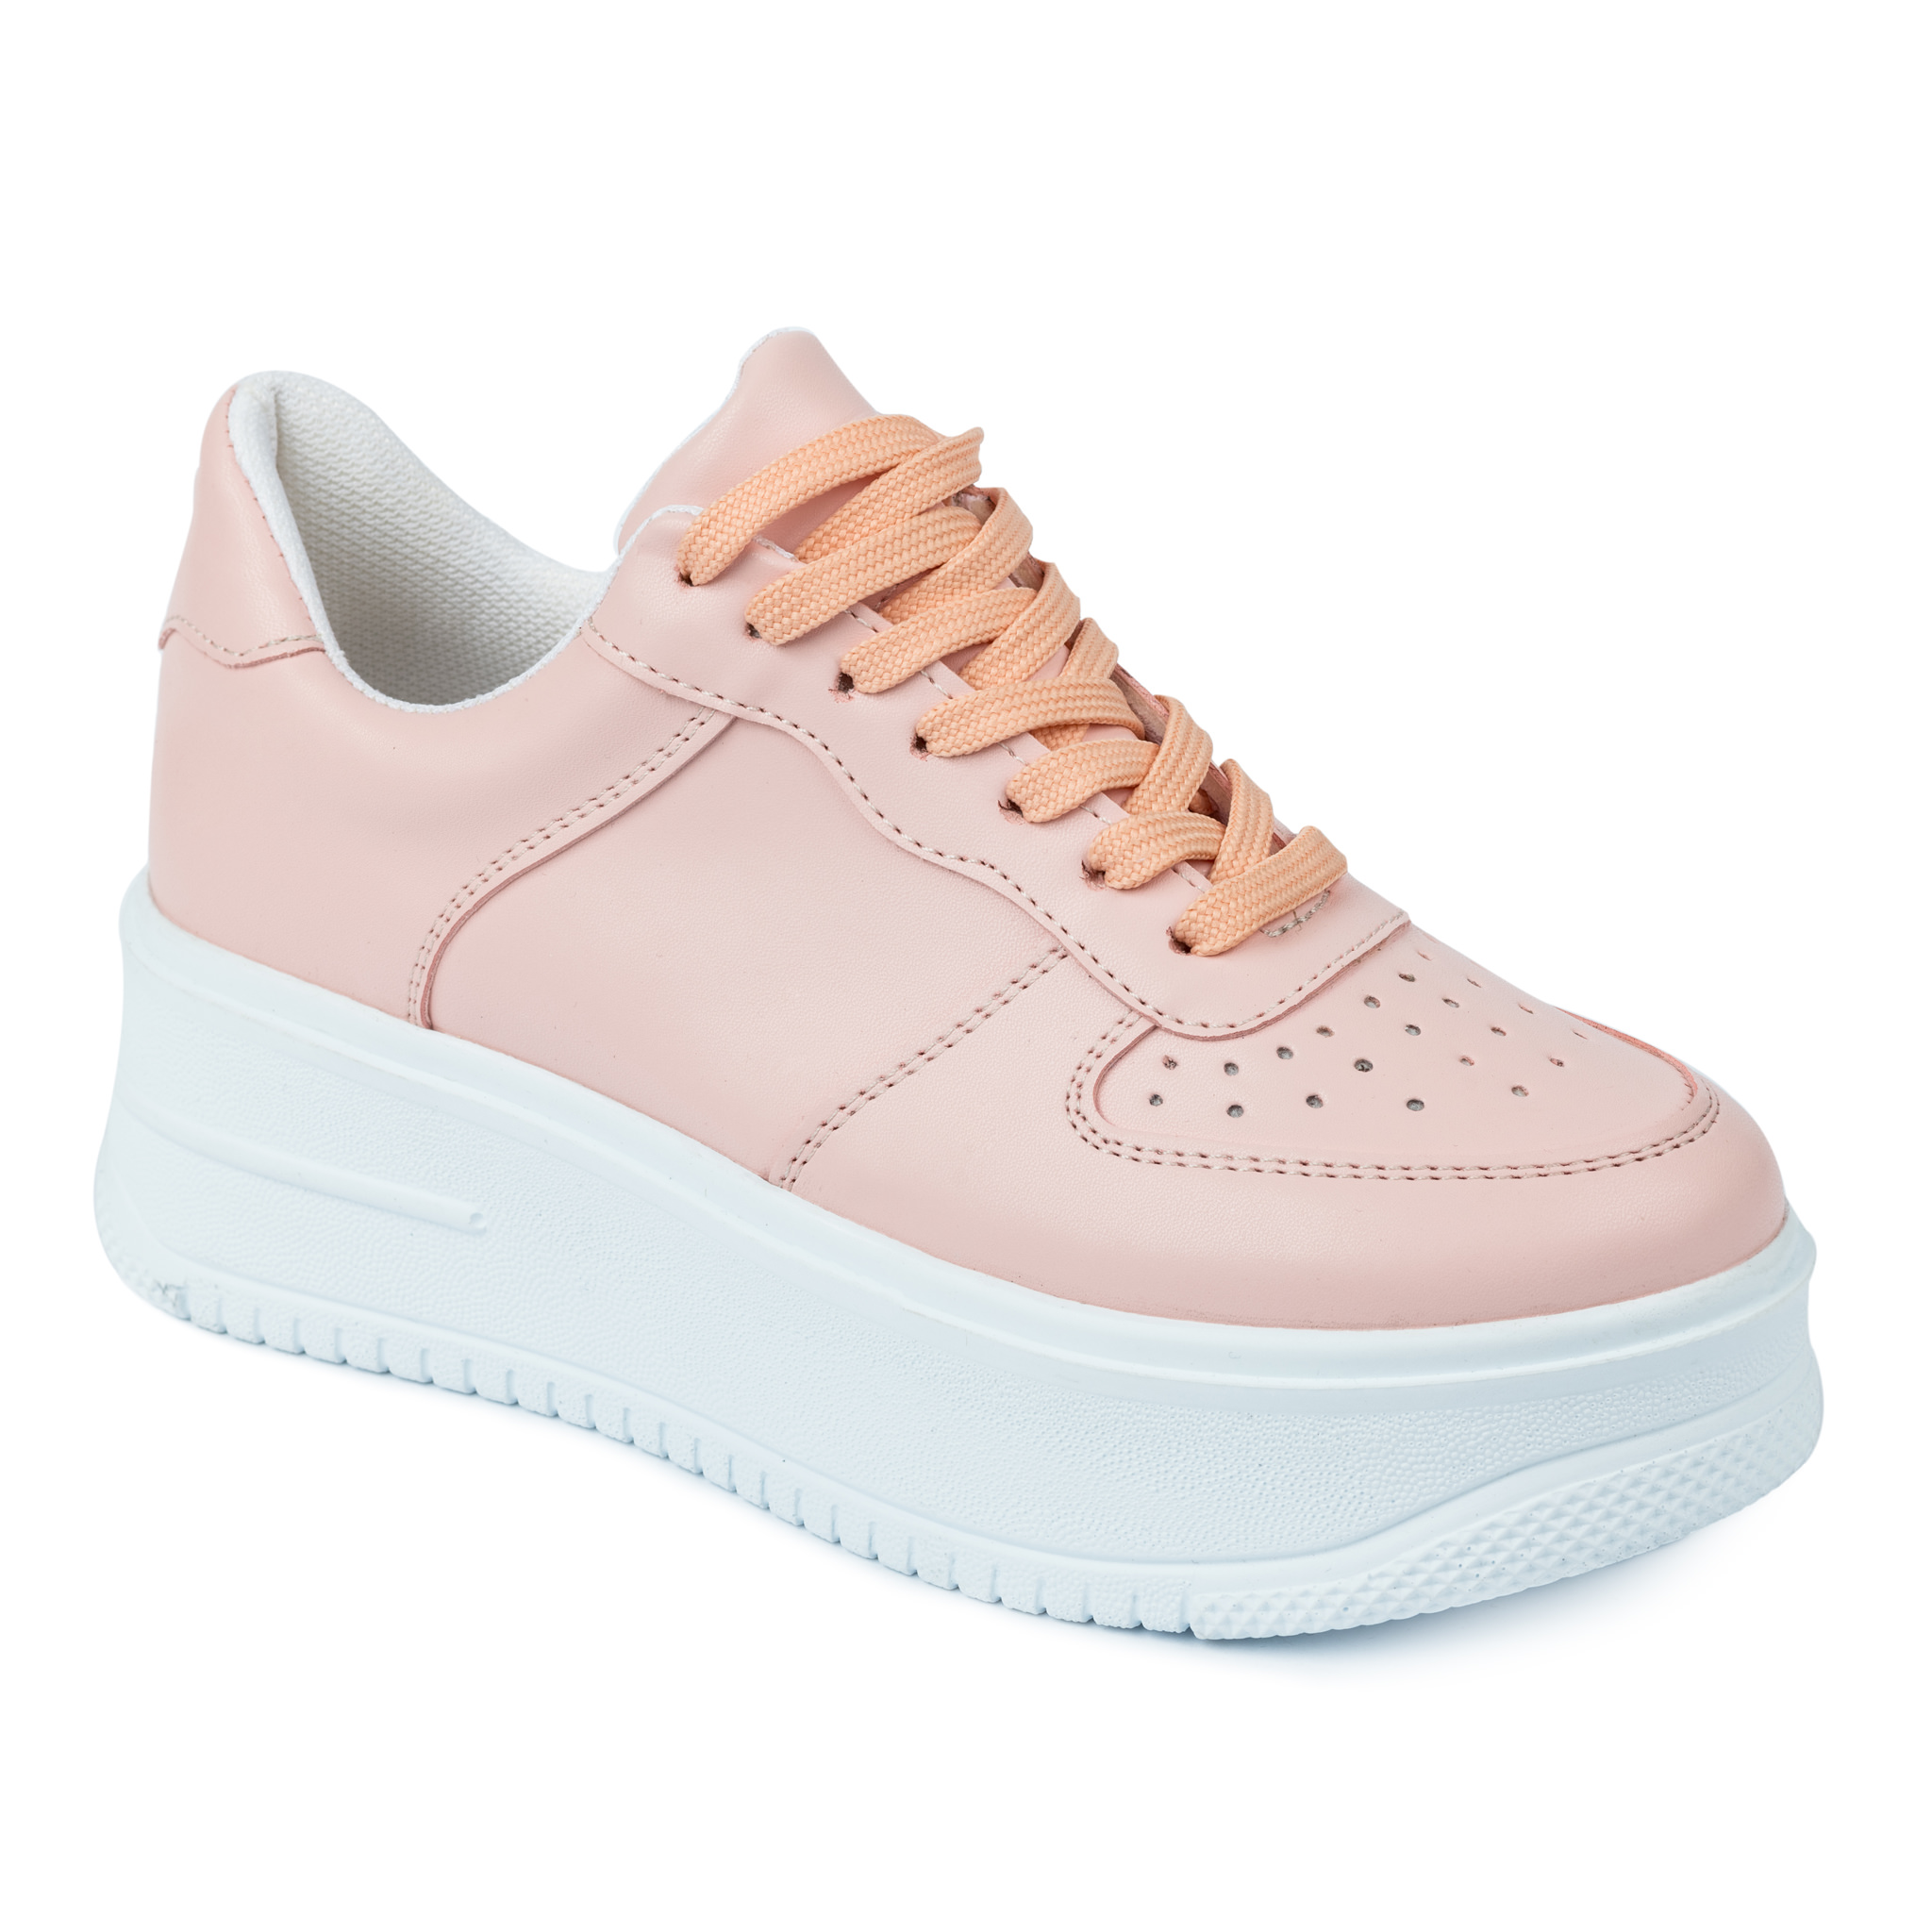 HIGH SOLE SNEAKERS - POWDER ROSE